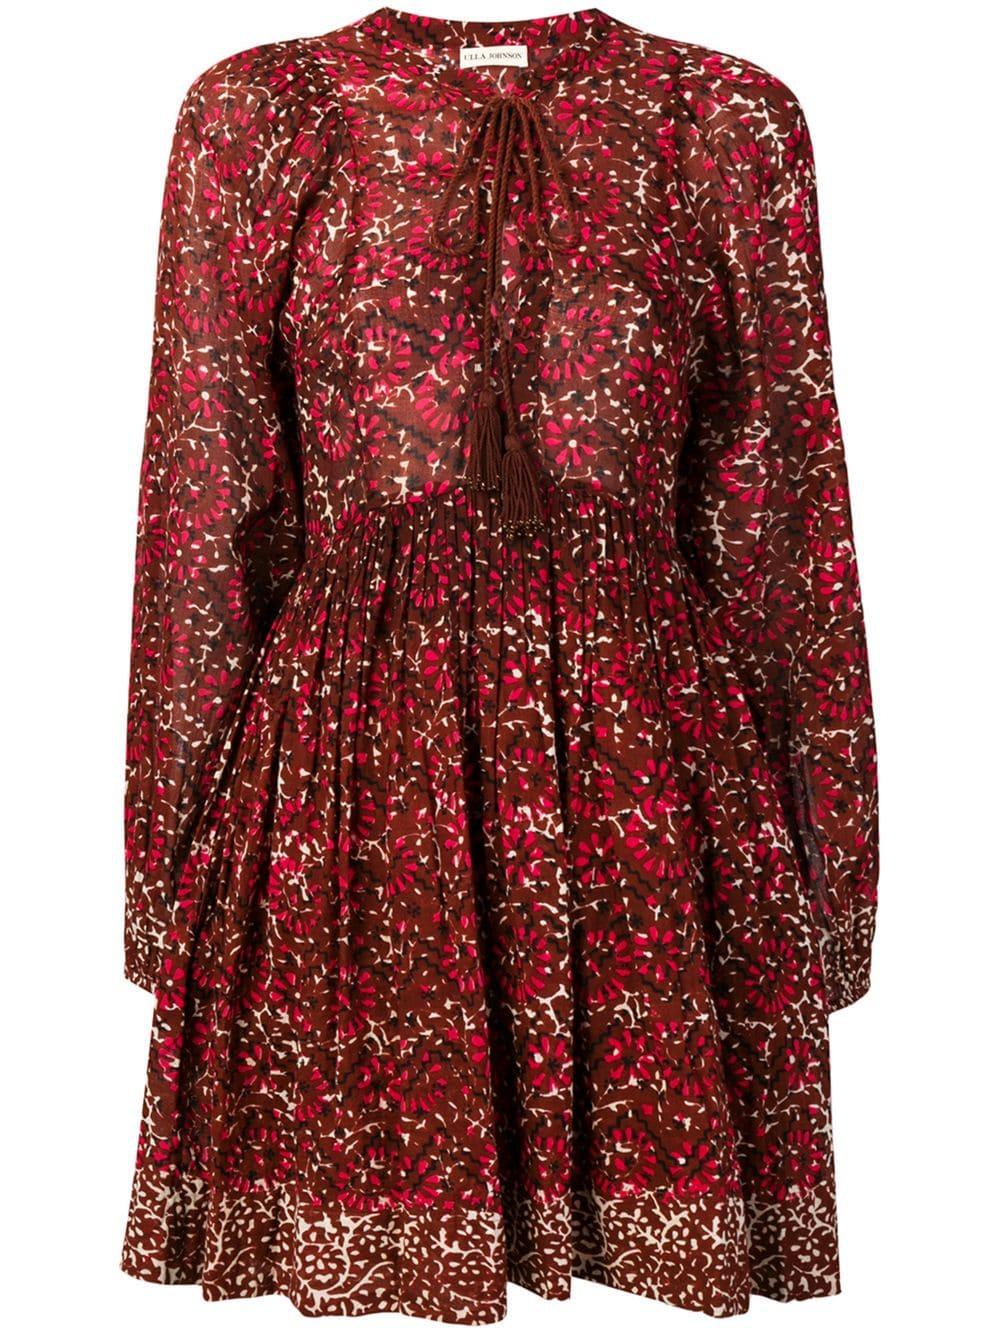 Ulla Johnson Cotton Lace-up Front Floral Dress in Red - Lyst